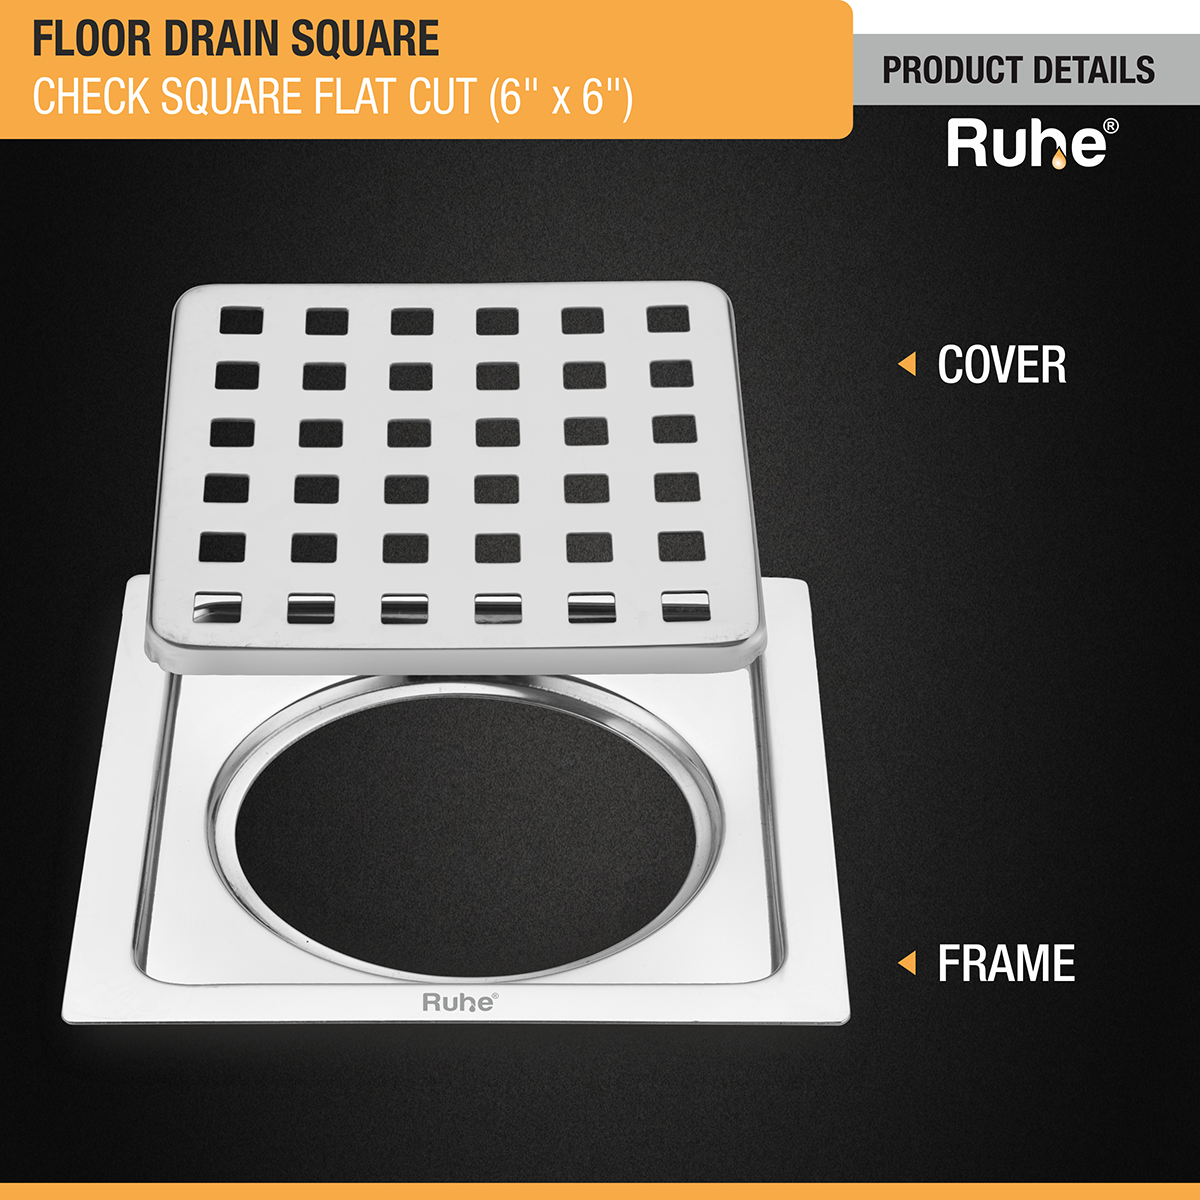 Check Floor Drain Square Flat Cut (6 x 6 Inches) product details